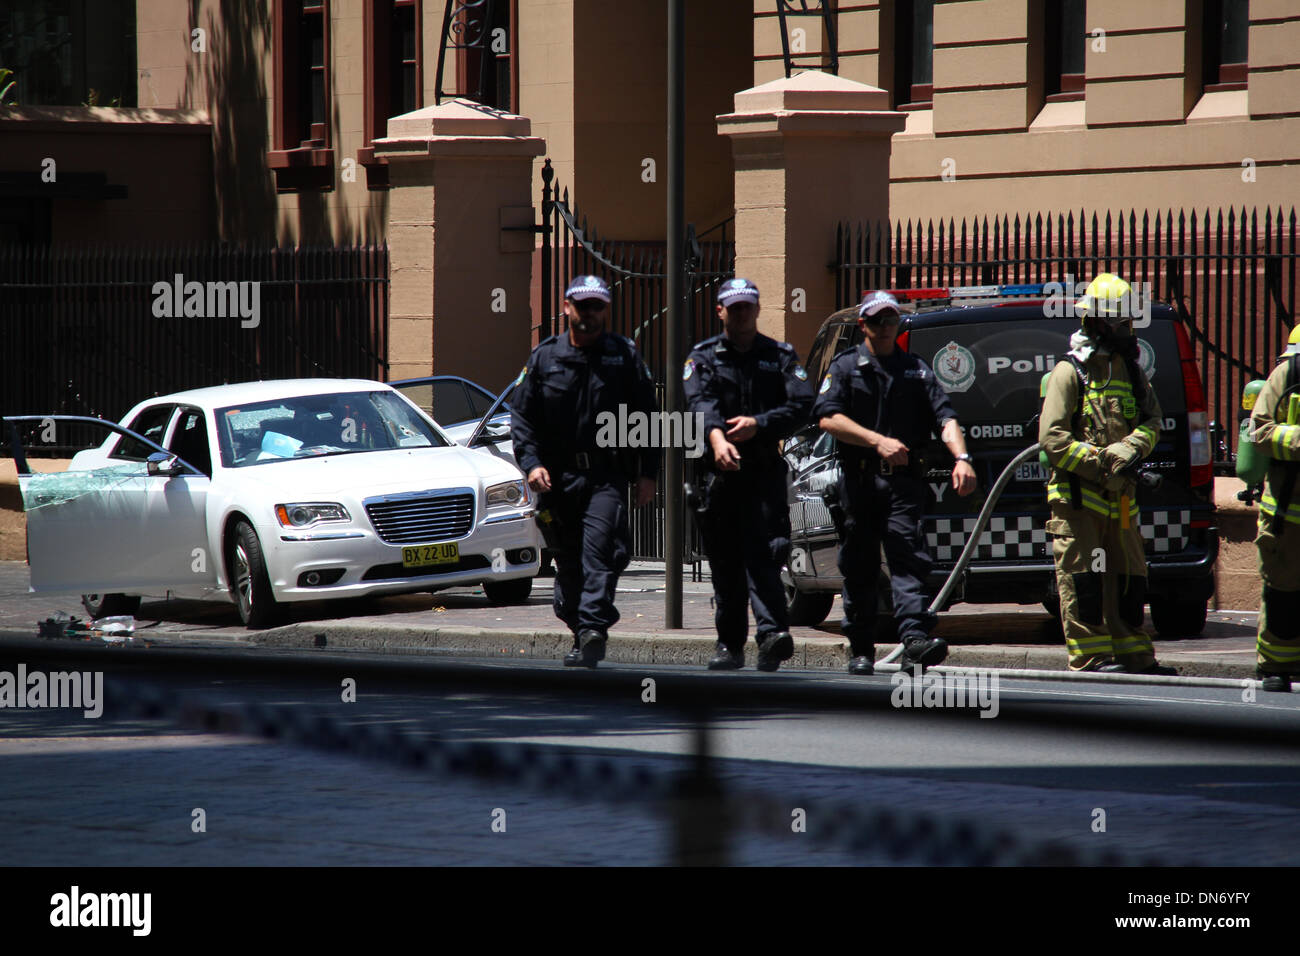 Macquarie Street, Sydney NSW 2000, Australia. 20 December 2013. Police and Fire & Rescue attend to the incident involving a man in a white car outside the NSW Parliament on Macquarie Street, Sydney. Copyright Credit:  2013 Richard Milnes/Alamy Live News Stock Photo